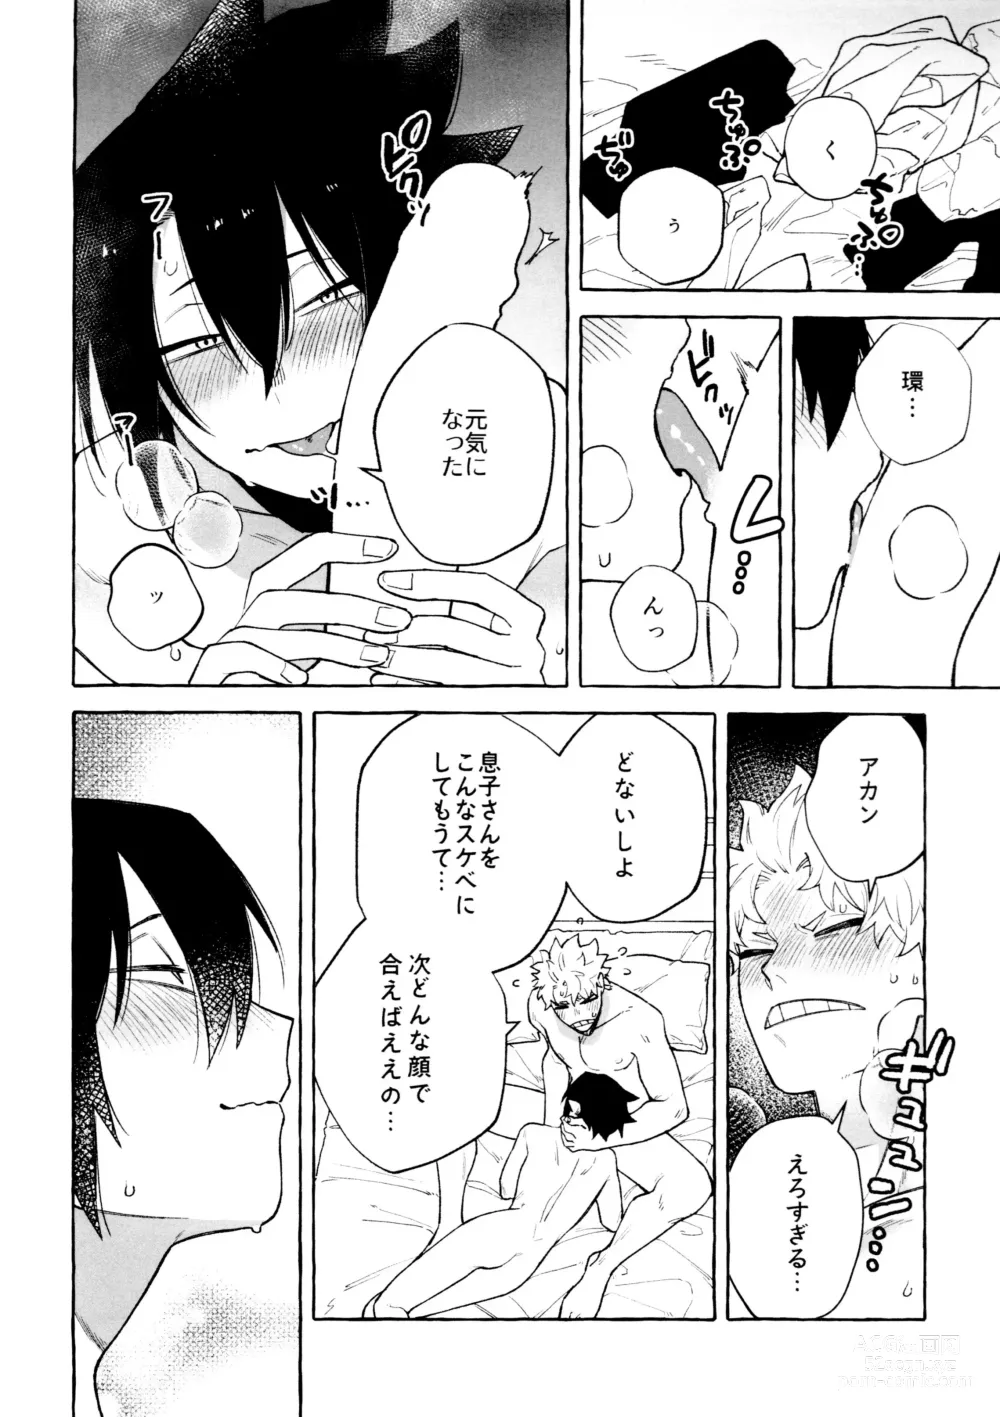 Page 16 of doujinshi Please please